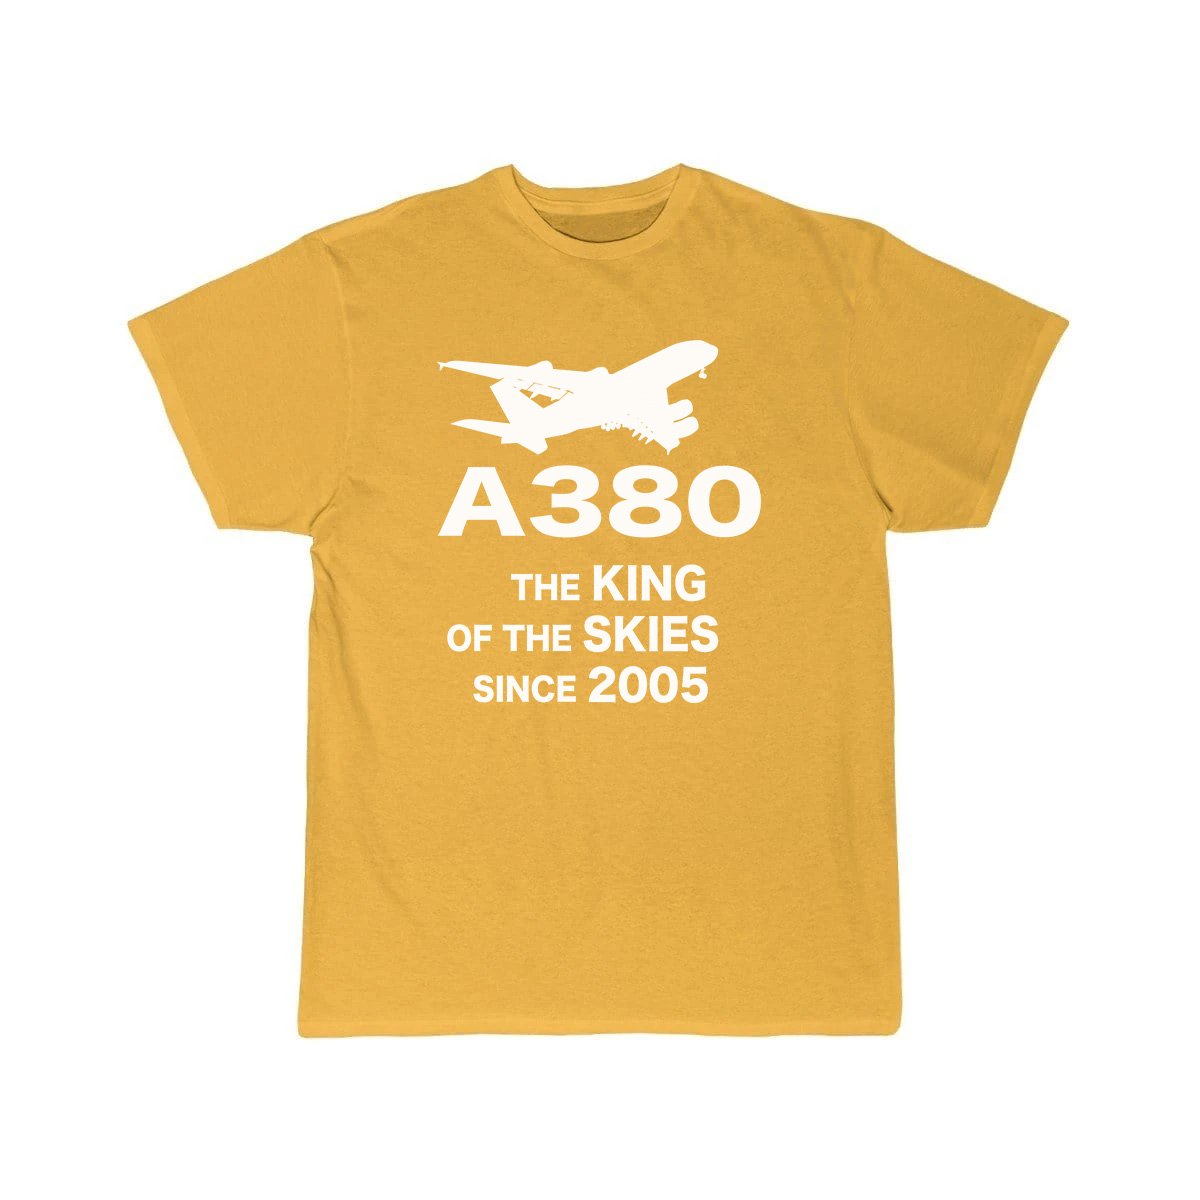 Airbus A380 The King Of The Skies Since 2005 Aviation Pilot T-Shirt THE AV8R